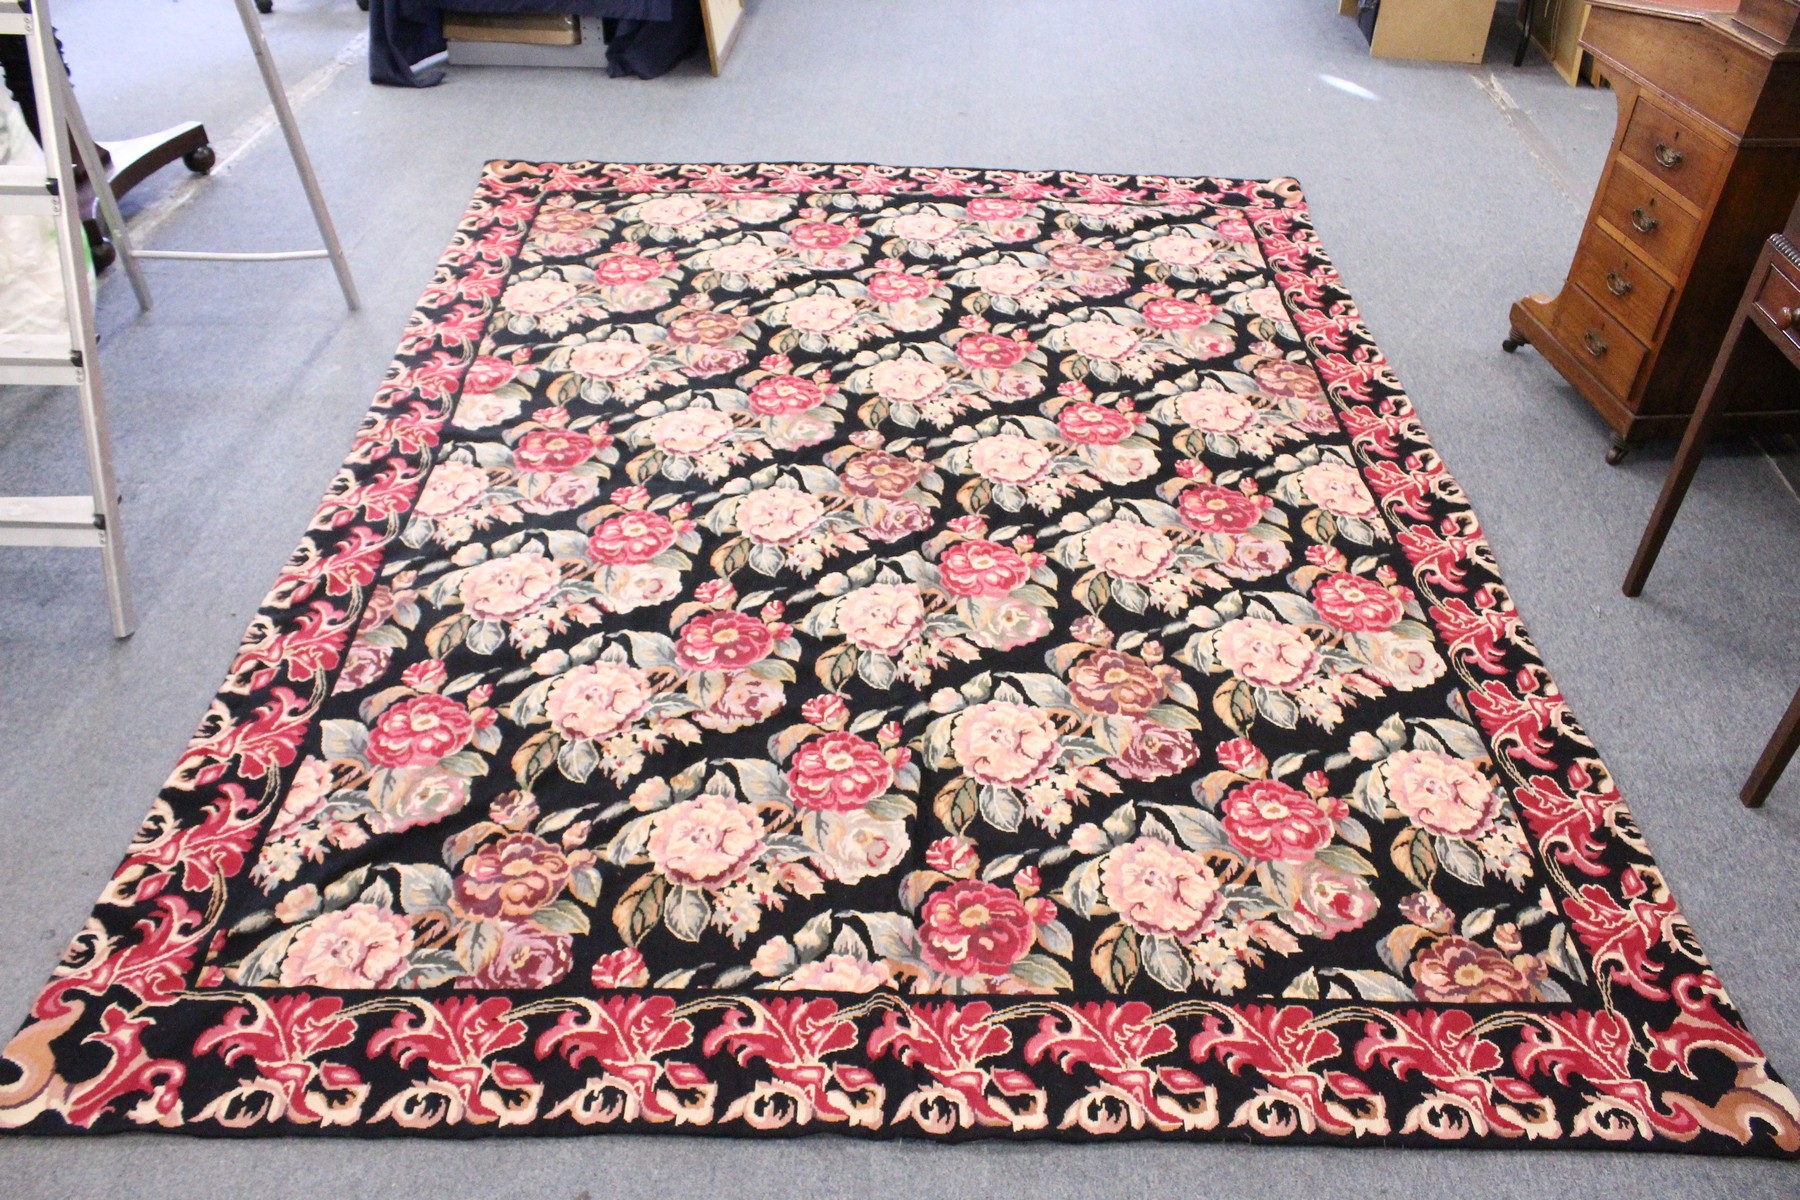 A LARGE AUBUSSON STYLE WOOLWORK TAPESTRY WALL HANGING, black ground with all-over floral decoration. - Image 2 of 8